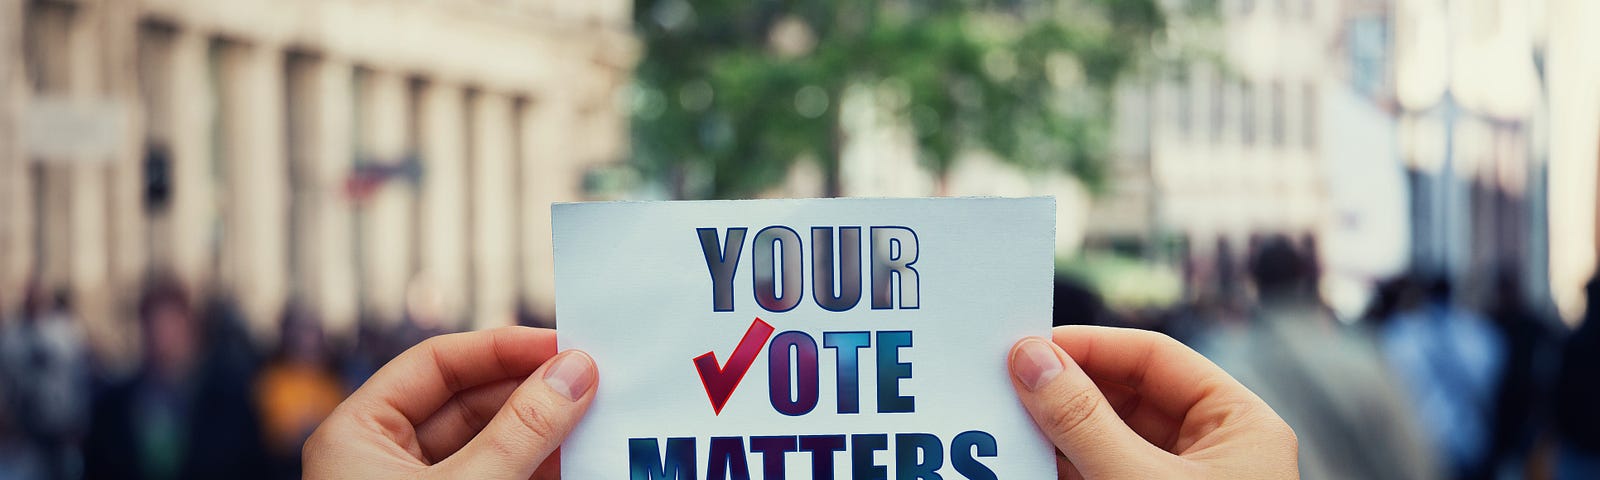 A picture of two hands, holding a small sign reading “YOUR VOTE MATTERS.”